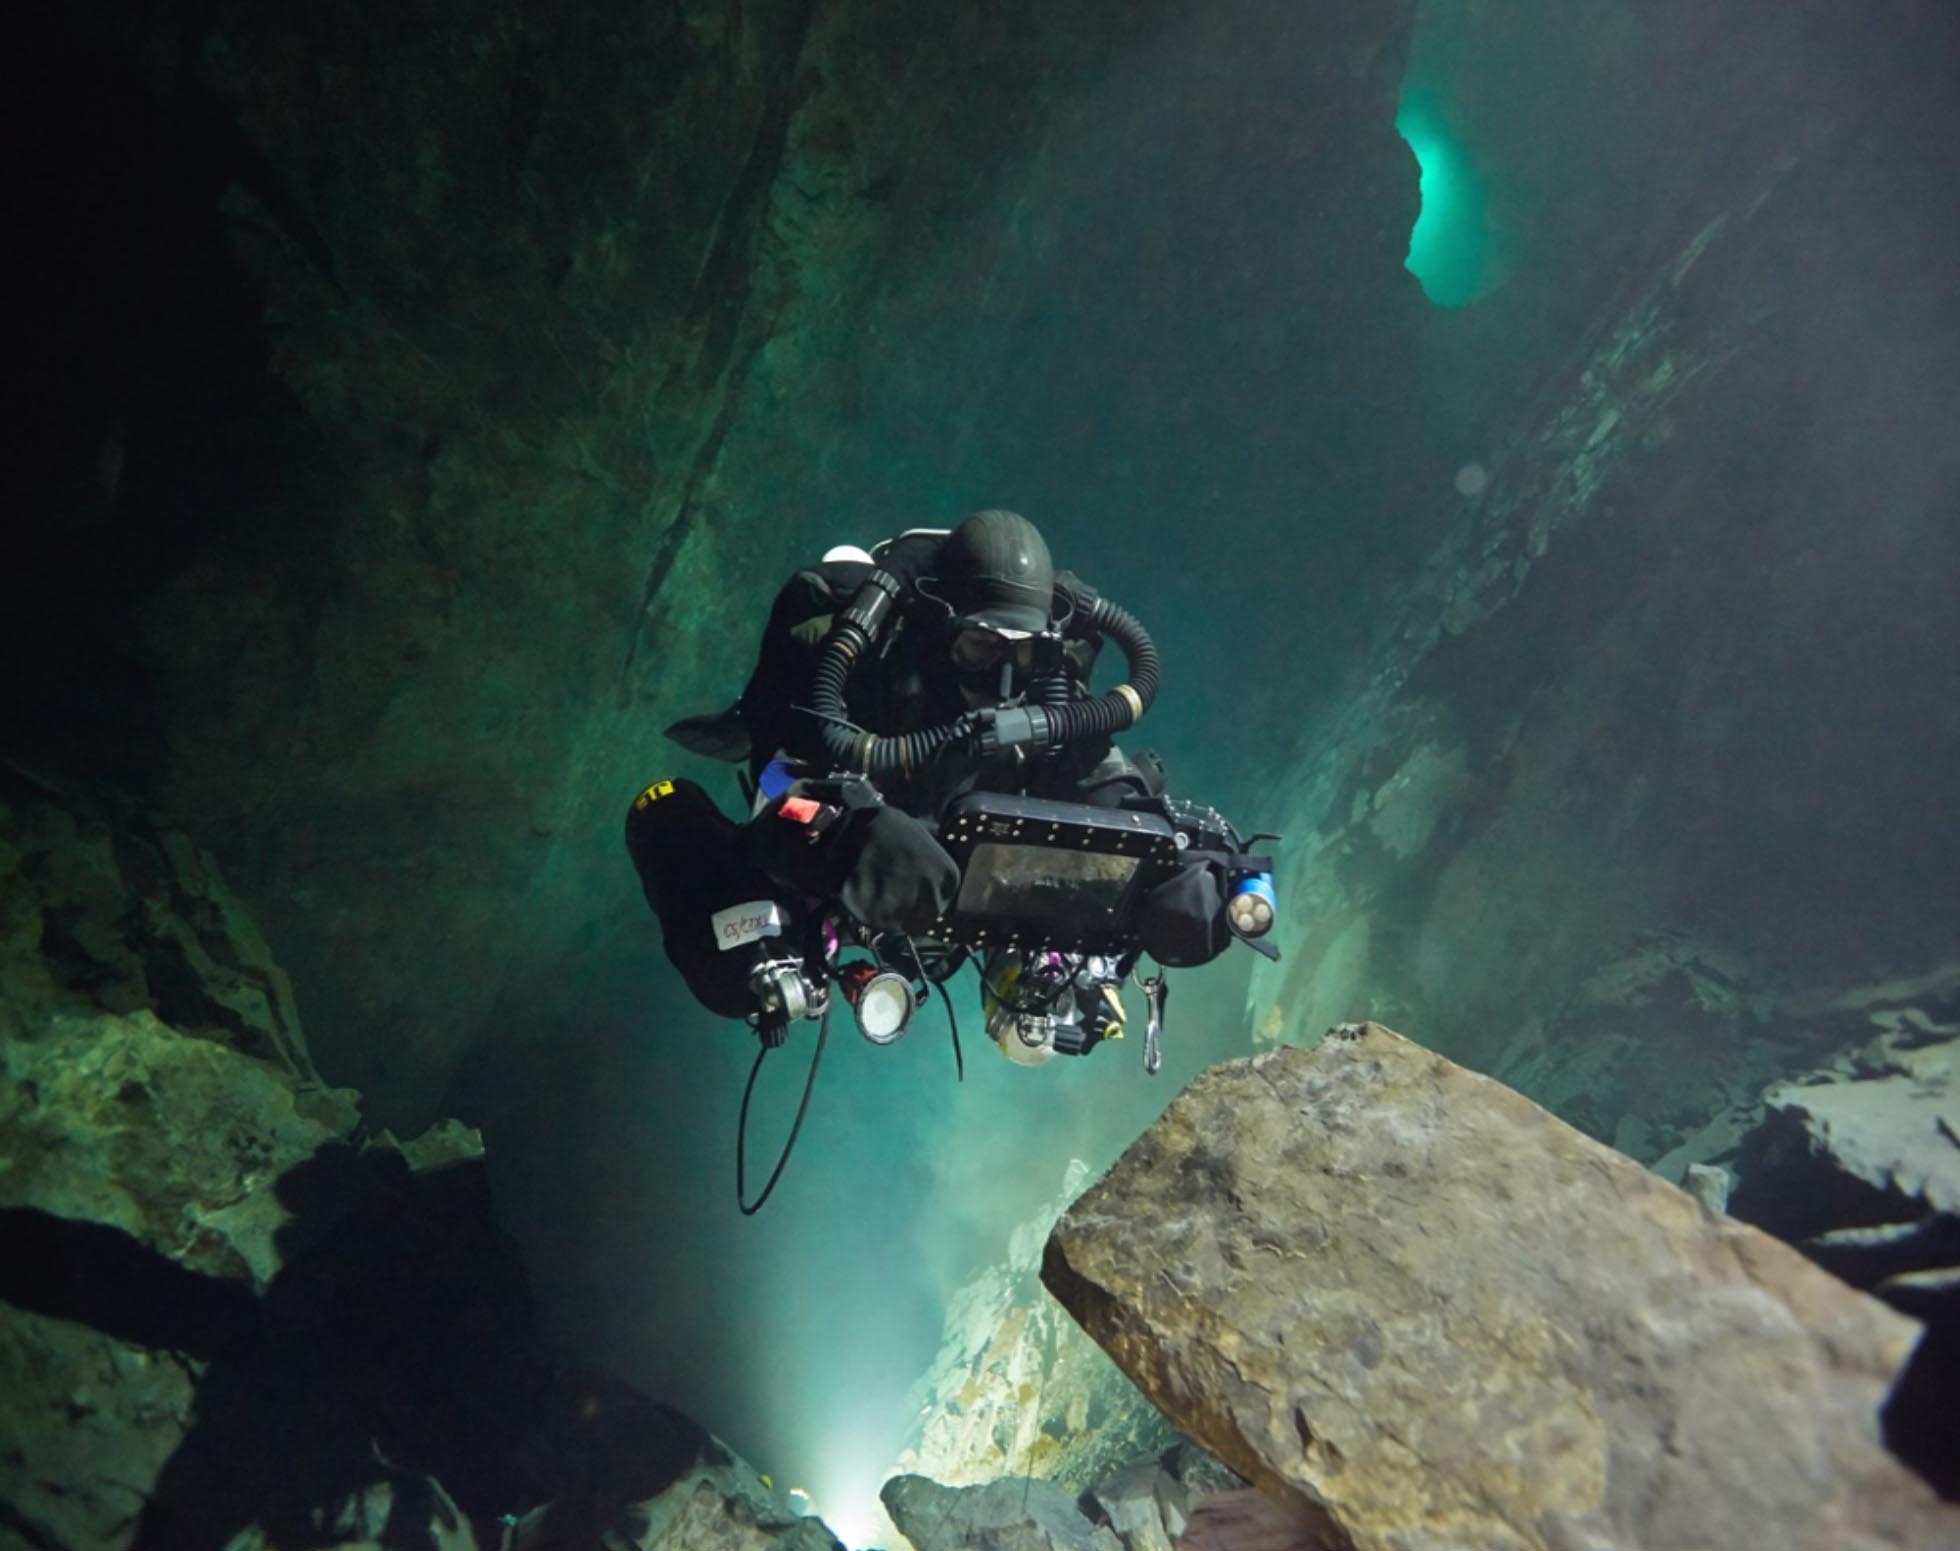 Technology for underwater use could change the way professional divers and researchers work.